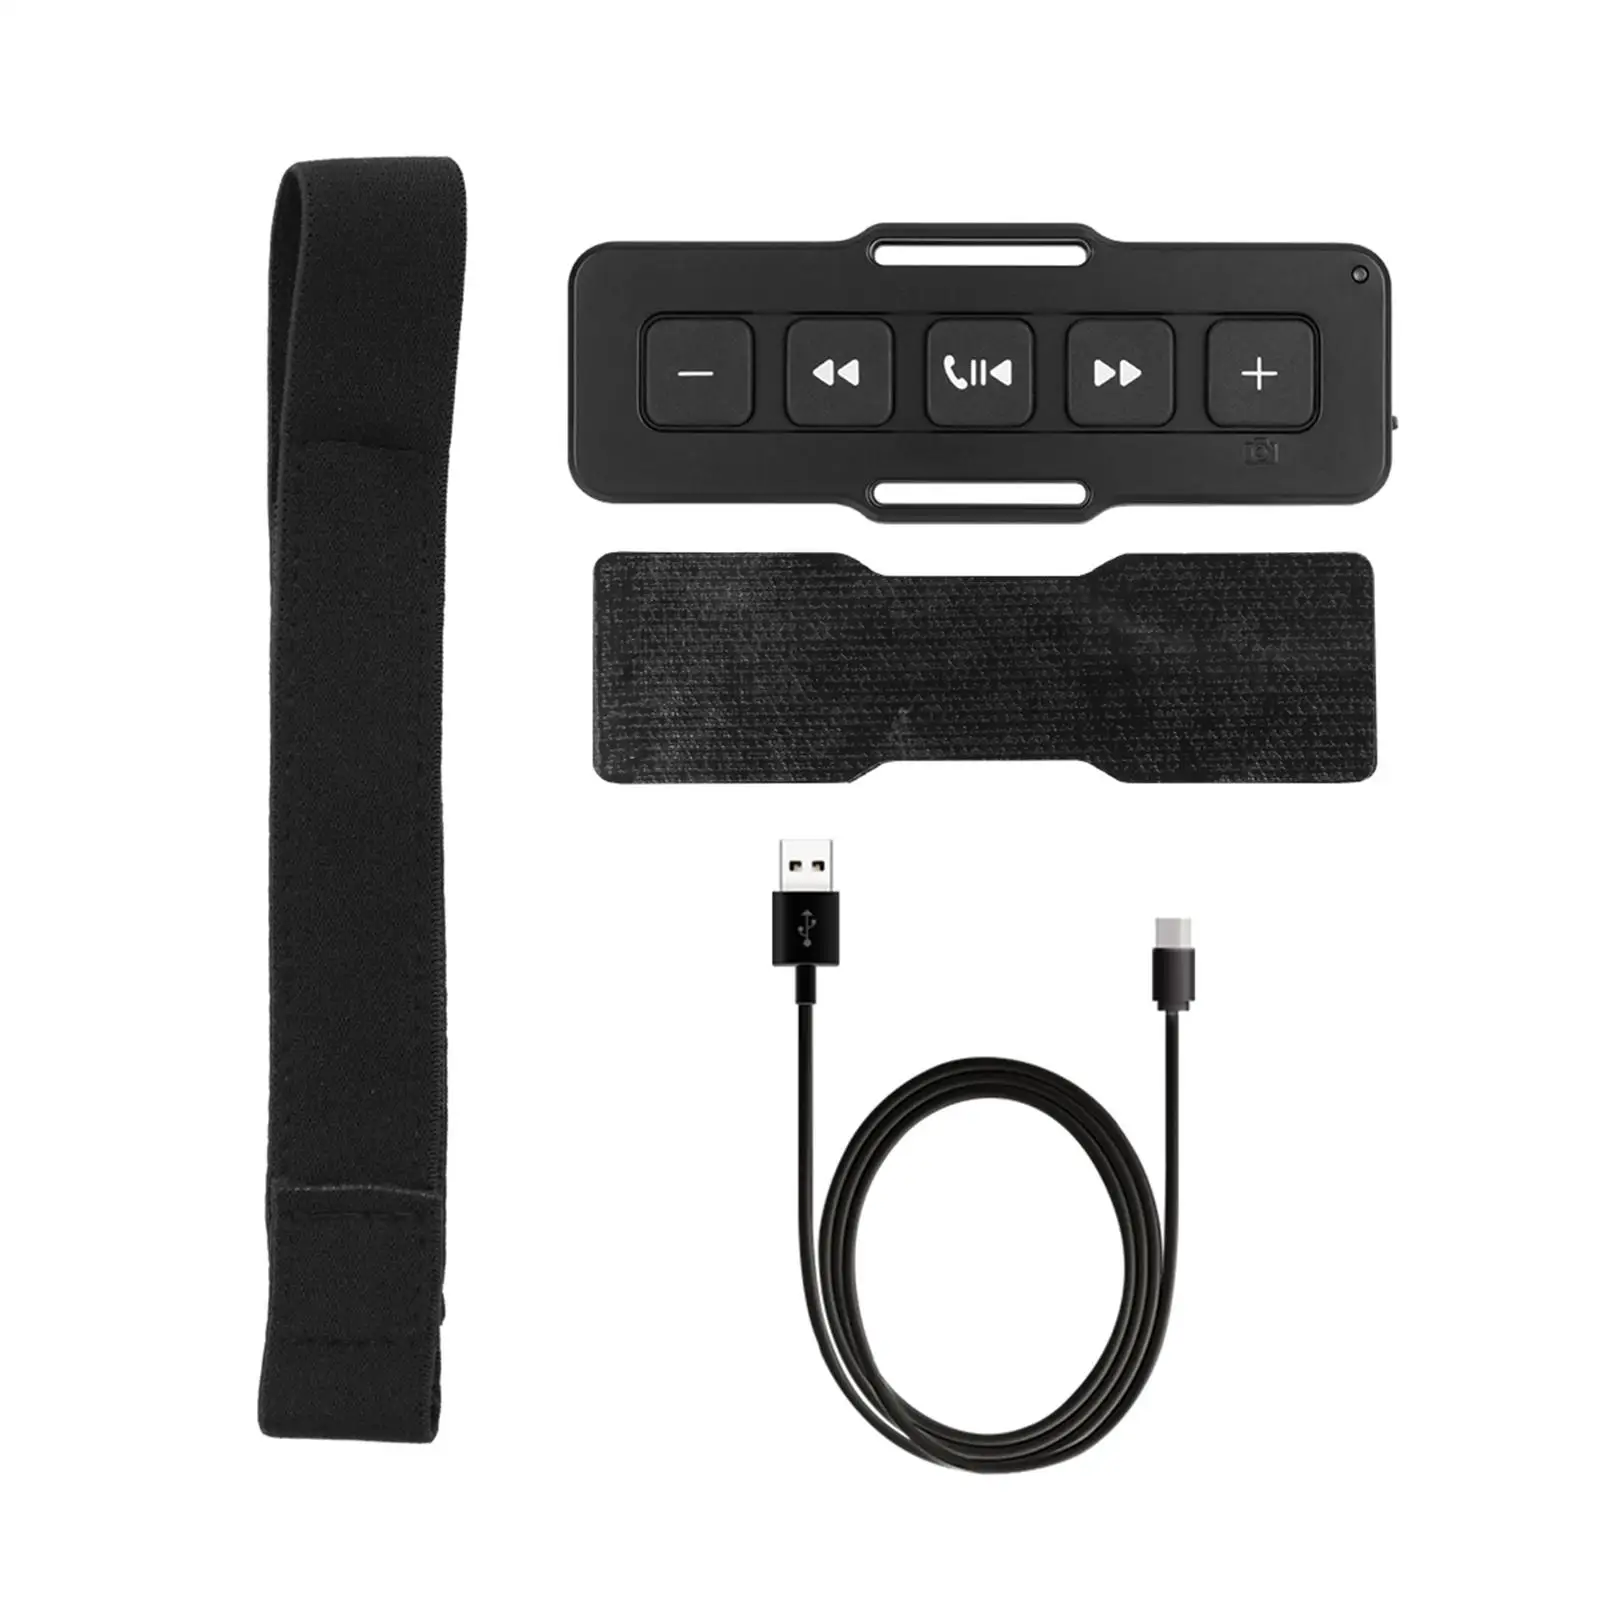 with Elastic Band Car Remote Controller 5 Button IPX4 Durable Portable Adjustable Music Control Media Control for Skiing